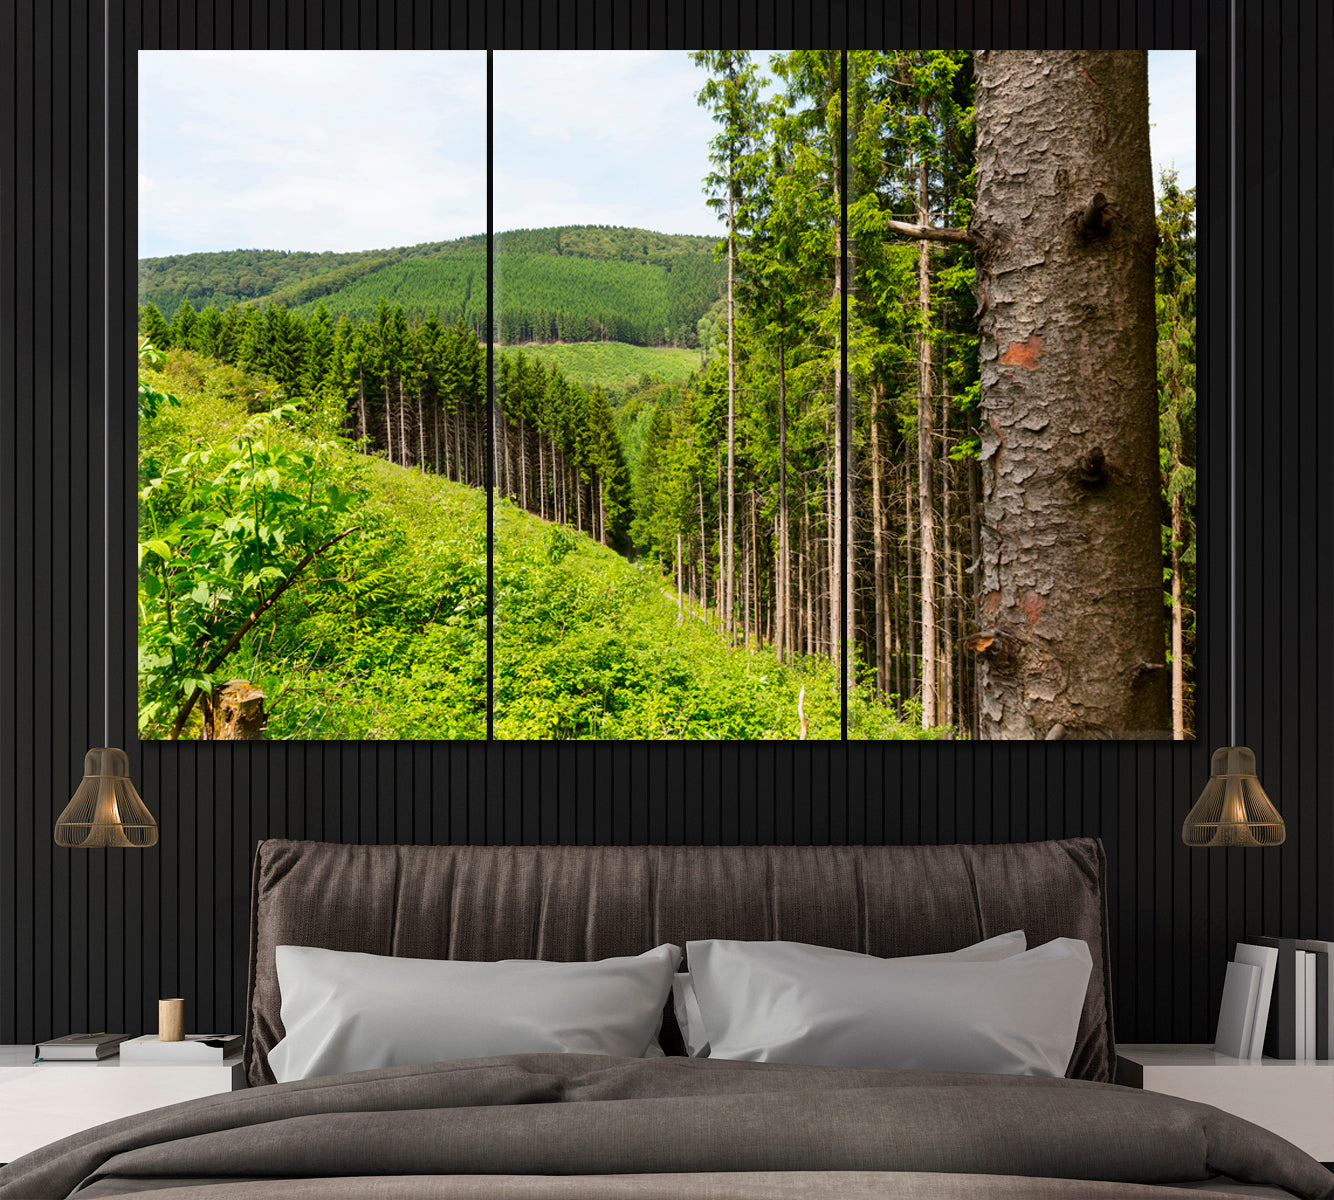 Sauerland Forest Germany Canvas Print ArtLexy 3 Panels 36"x24" inches 